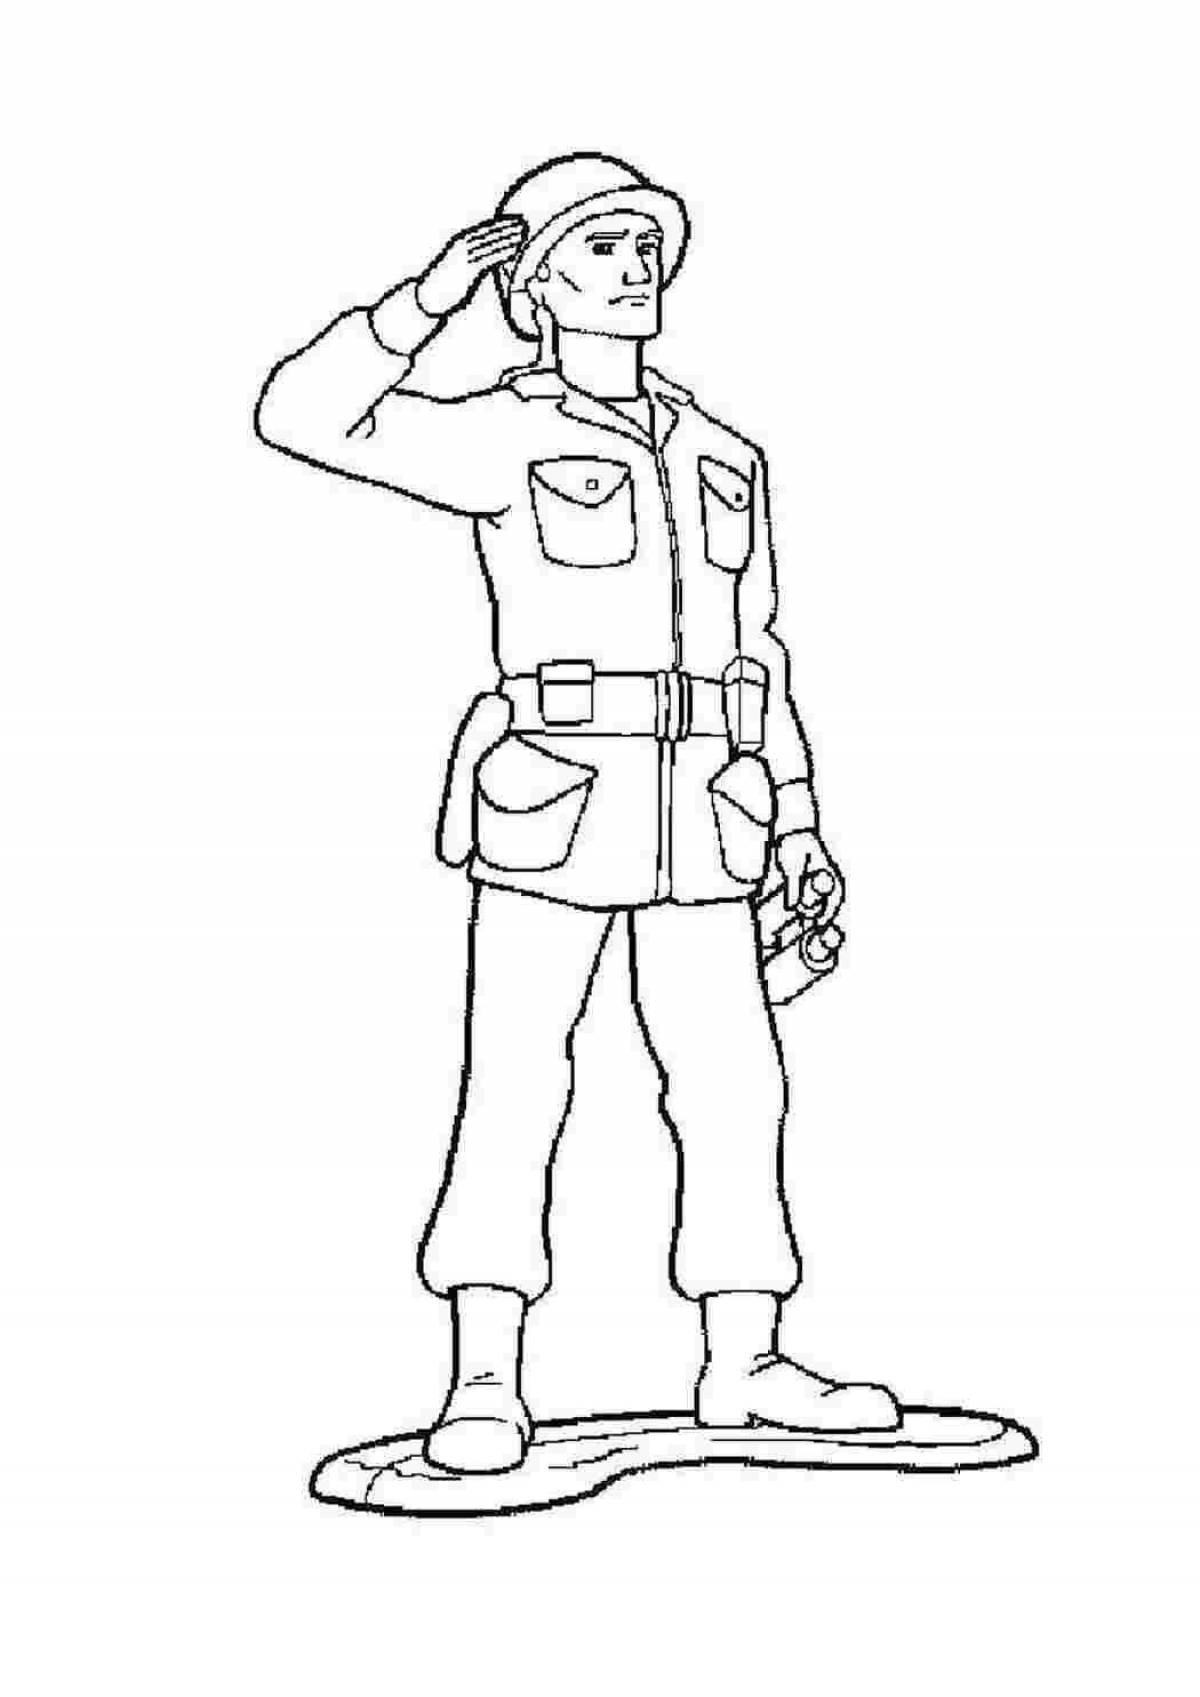 Playful russian soldier coloring page for kids